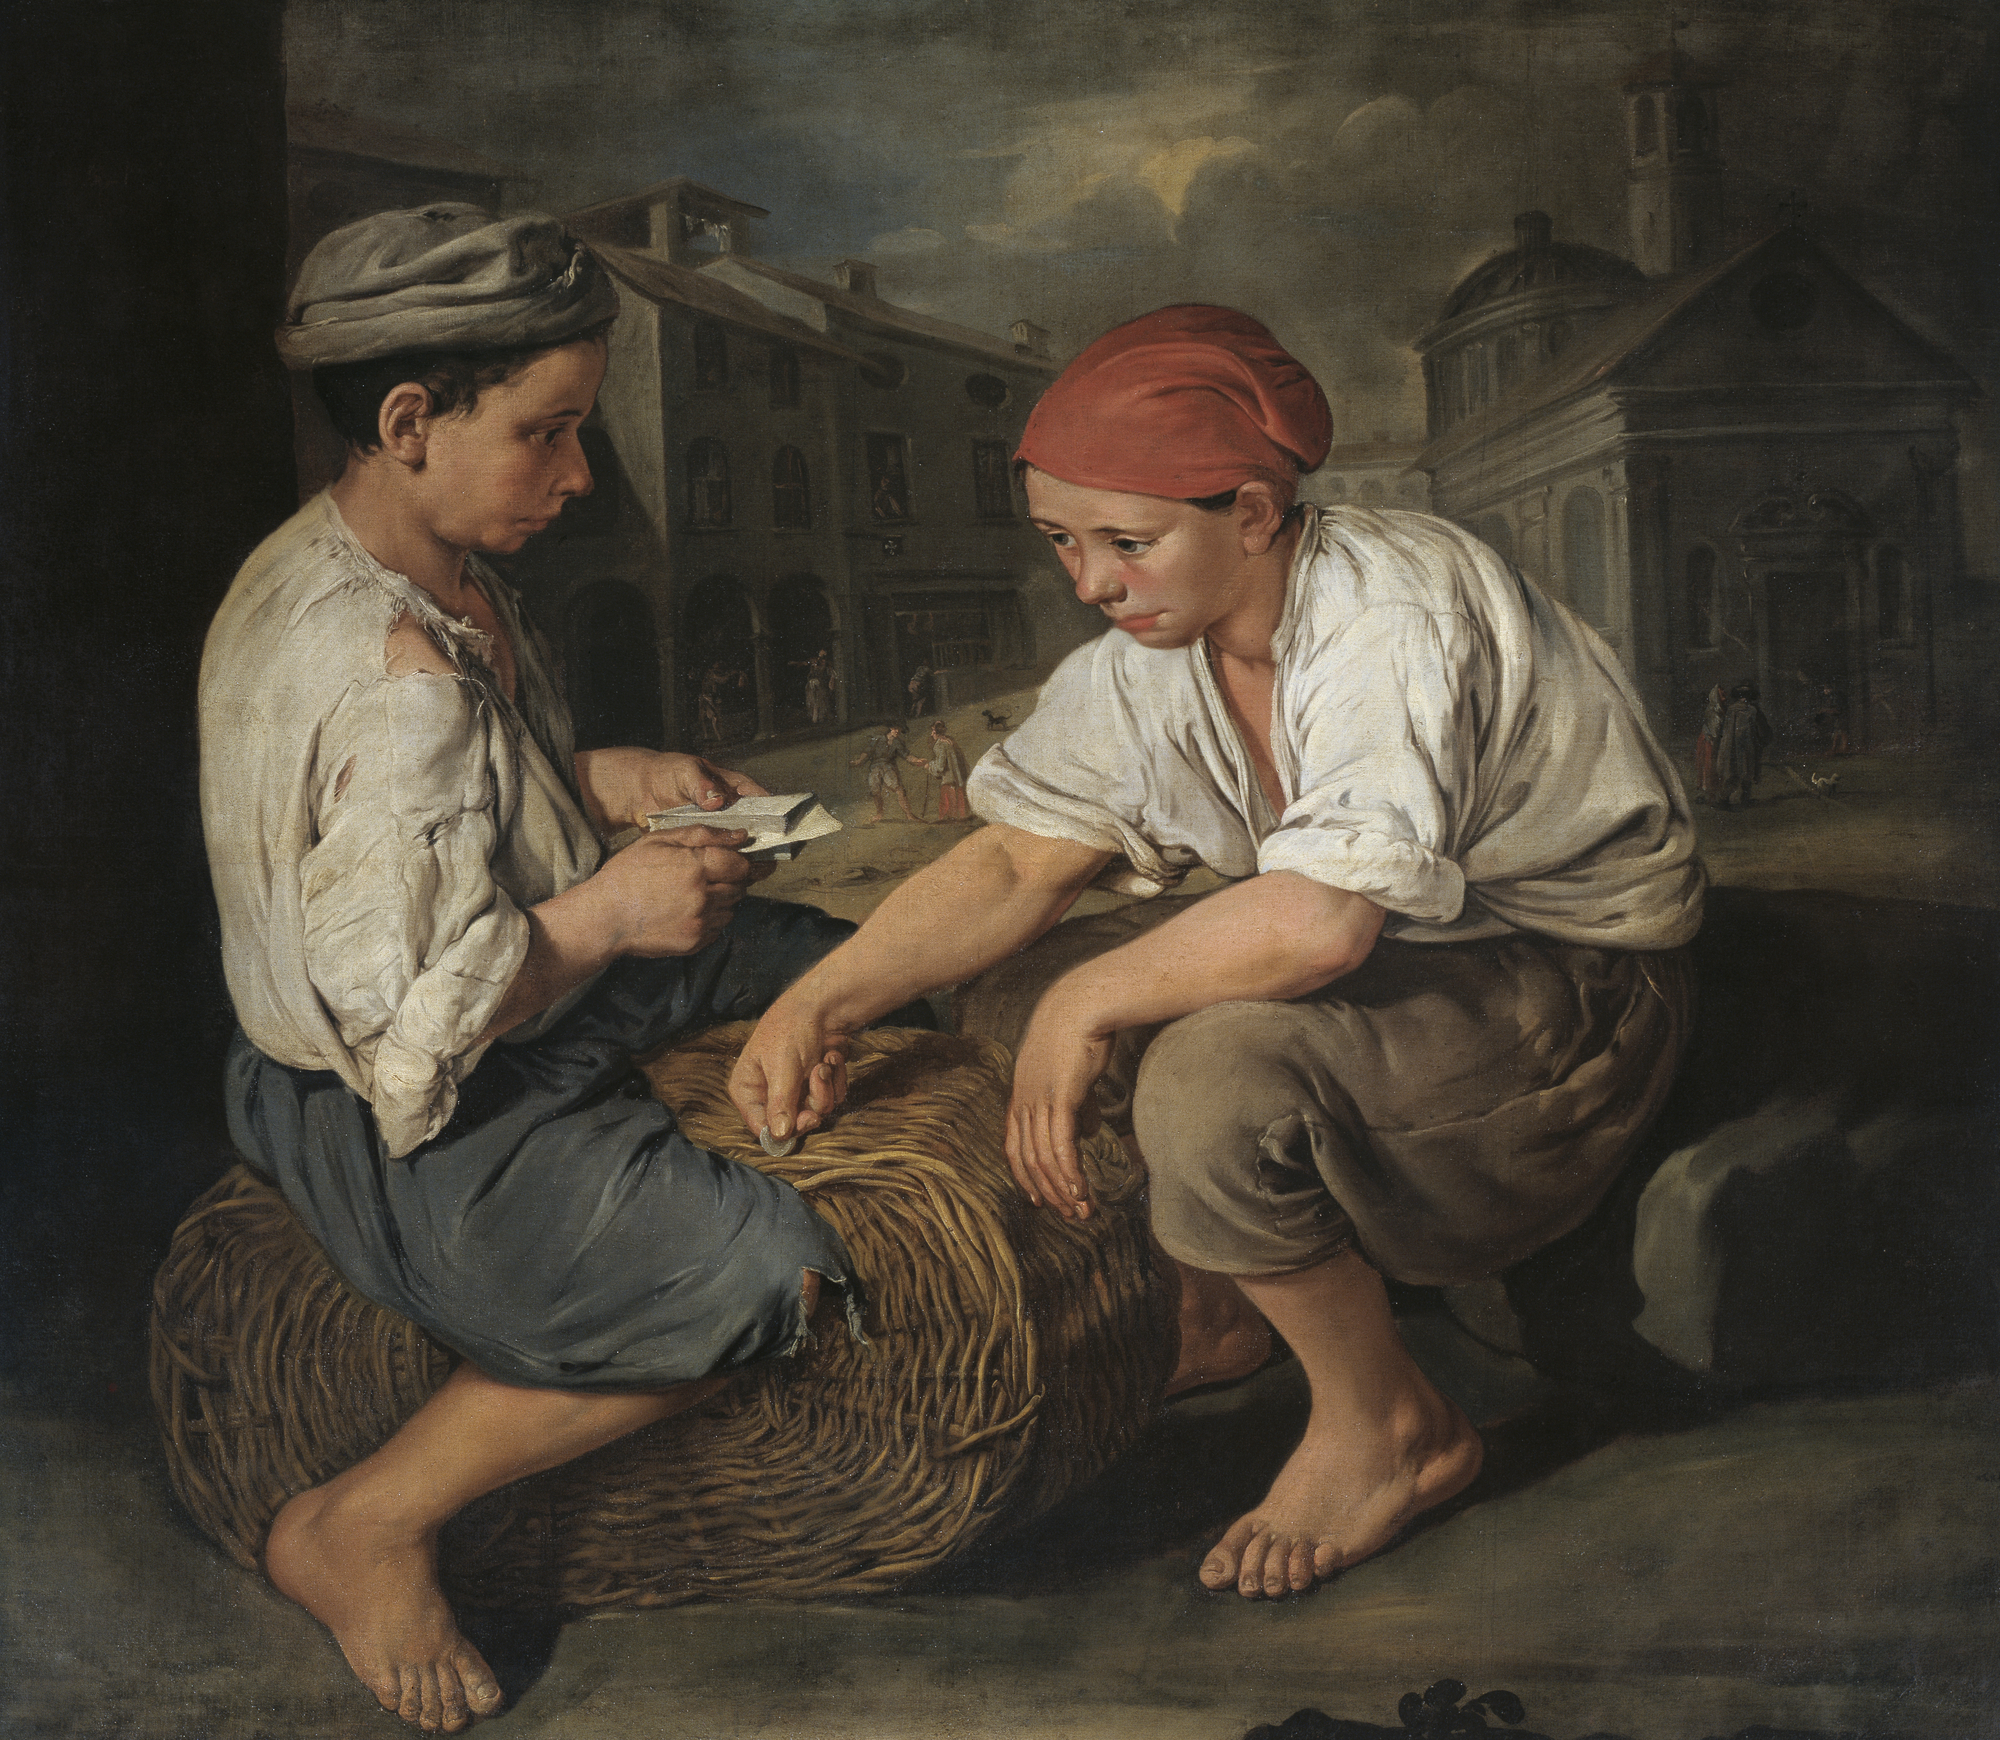 Giacomo Ceruti, "Basket Porters Playing Cards," about 1730–34, Oil on canvas, Private collection, Image © Fotostudio Rapuzzi, Brescia, EX.2023.4.21 